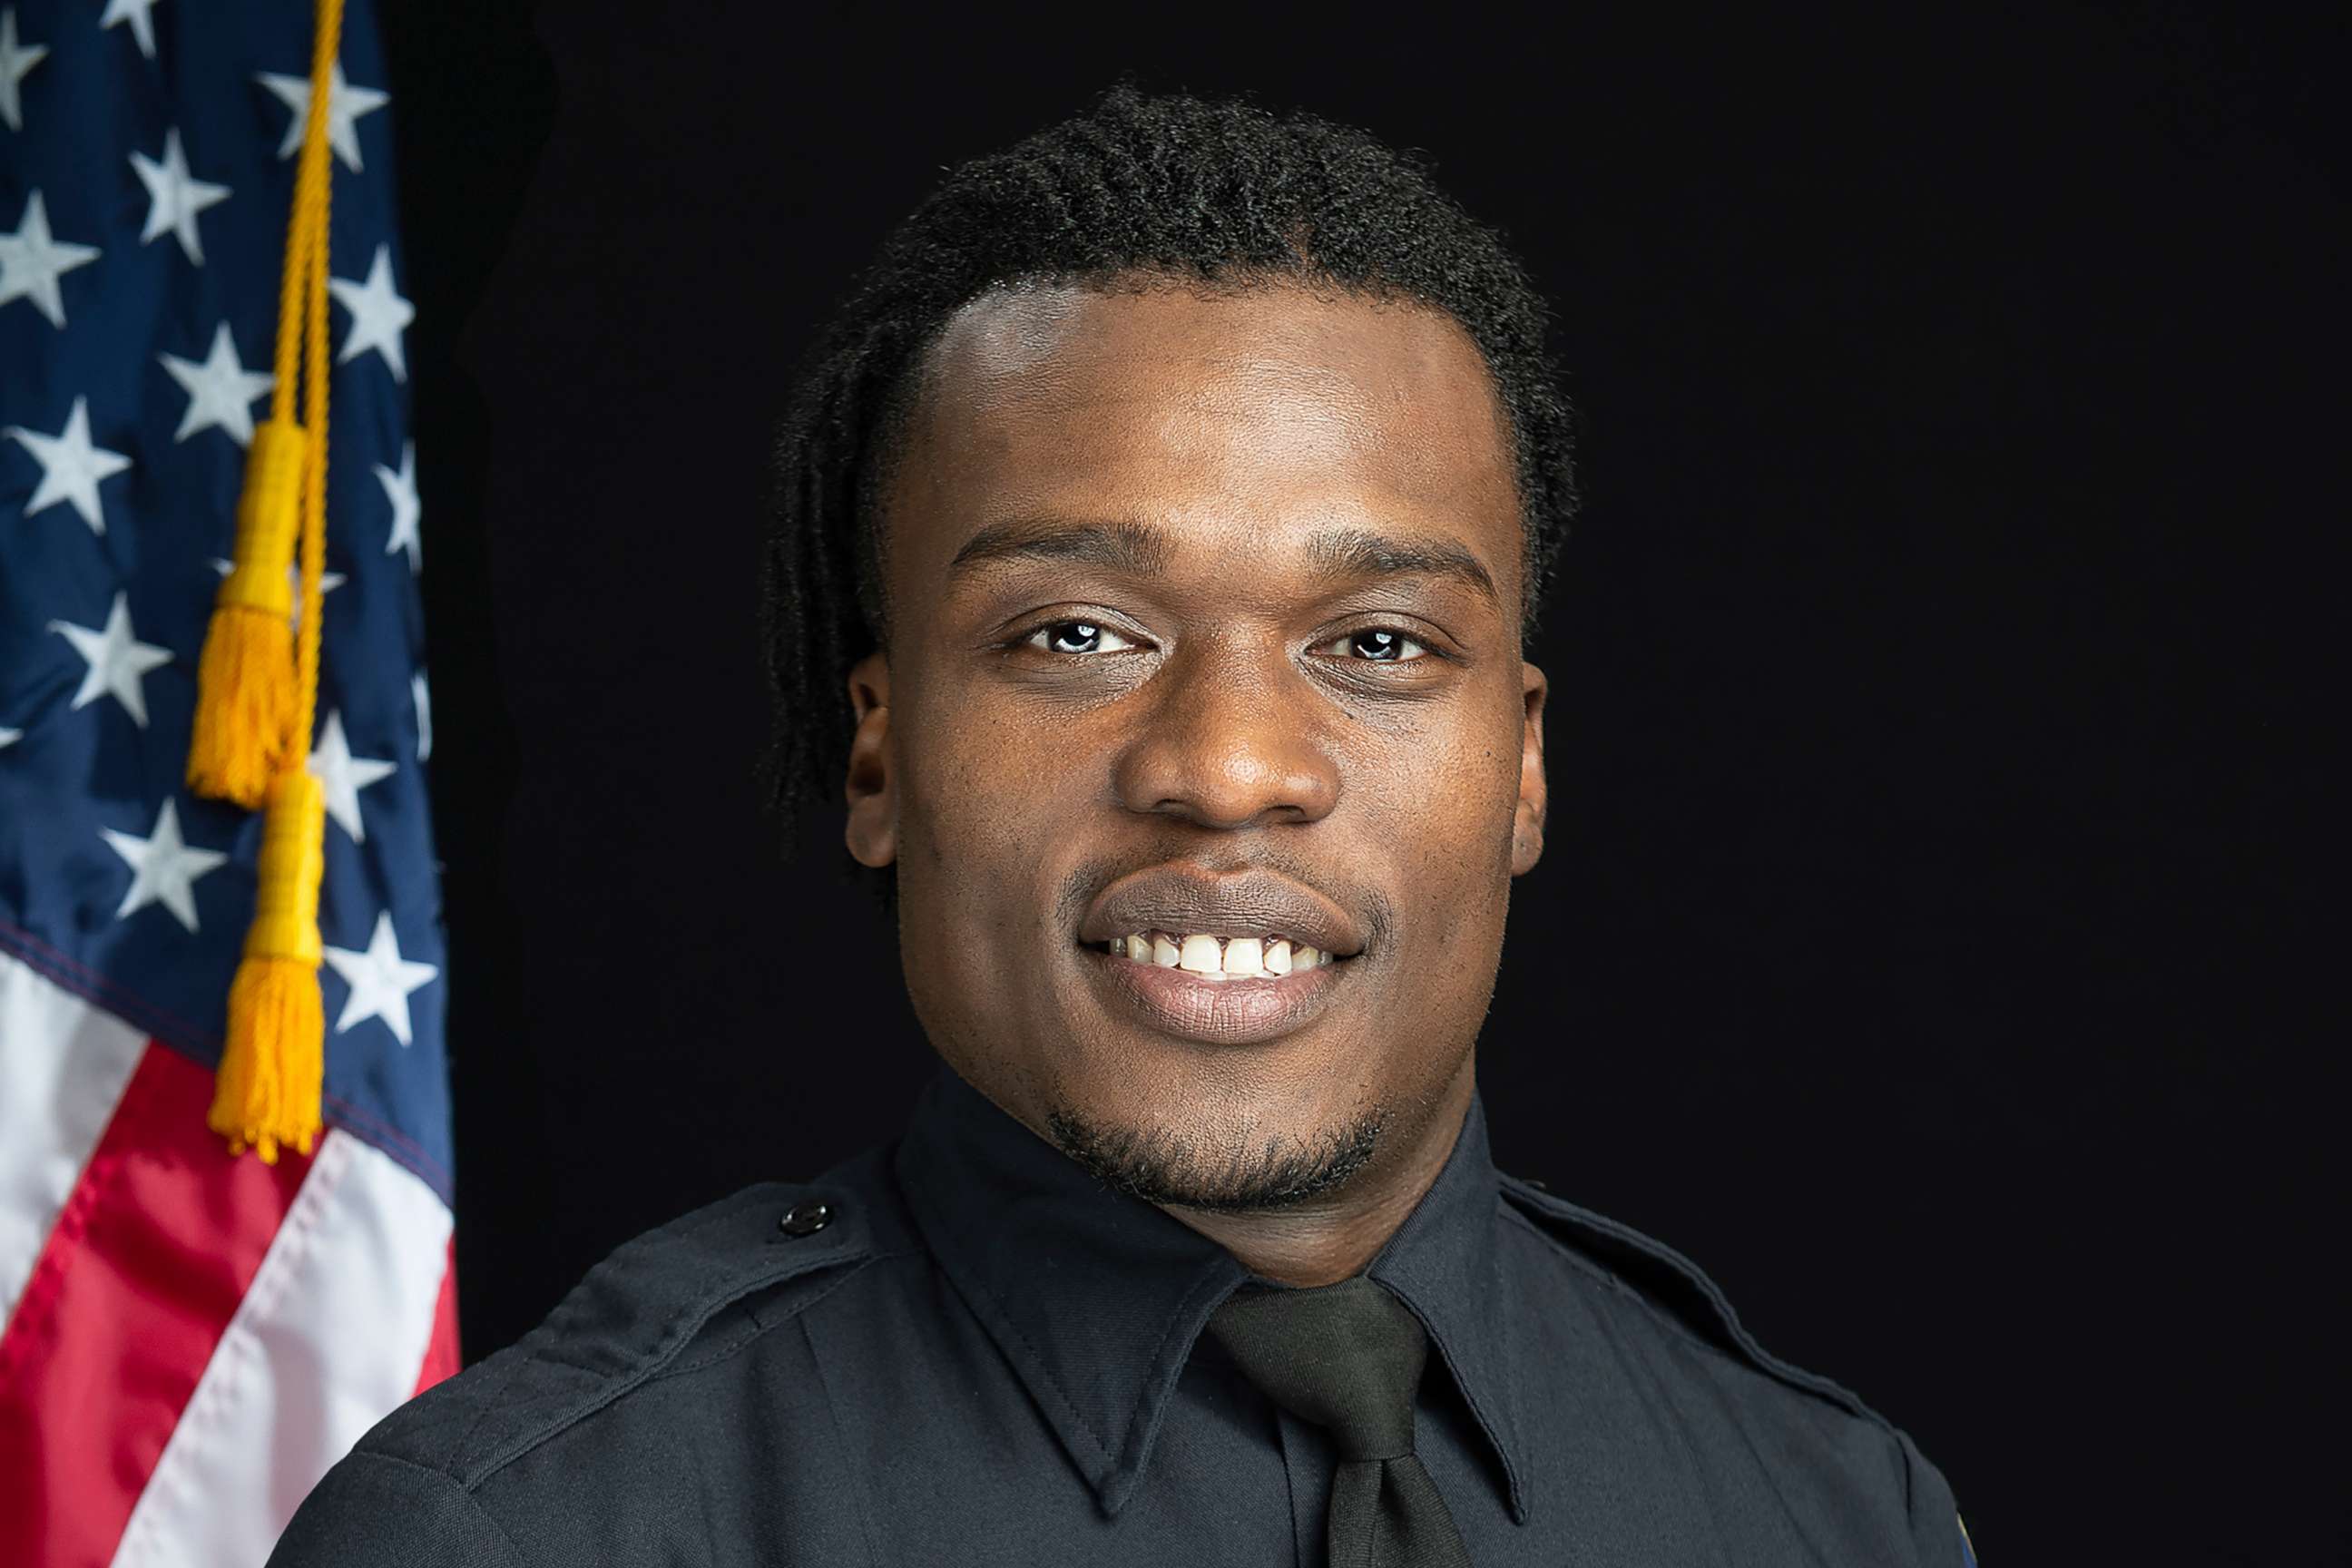 PHOTO: This undated photo provided by the Wauwatosa Police Department in Wauwatosa, Wis., shows Wauwatosa Police Officer Joseph Mensah.